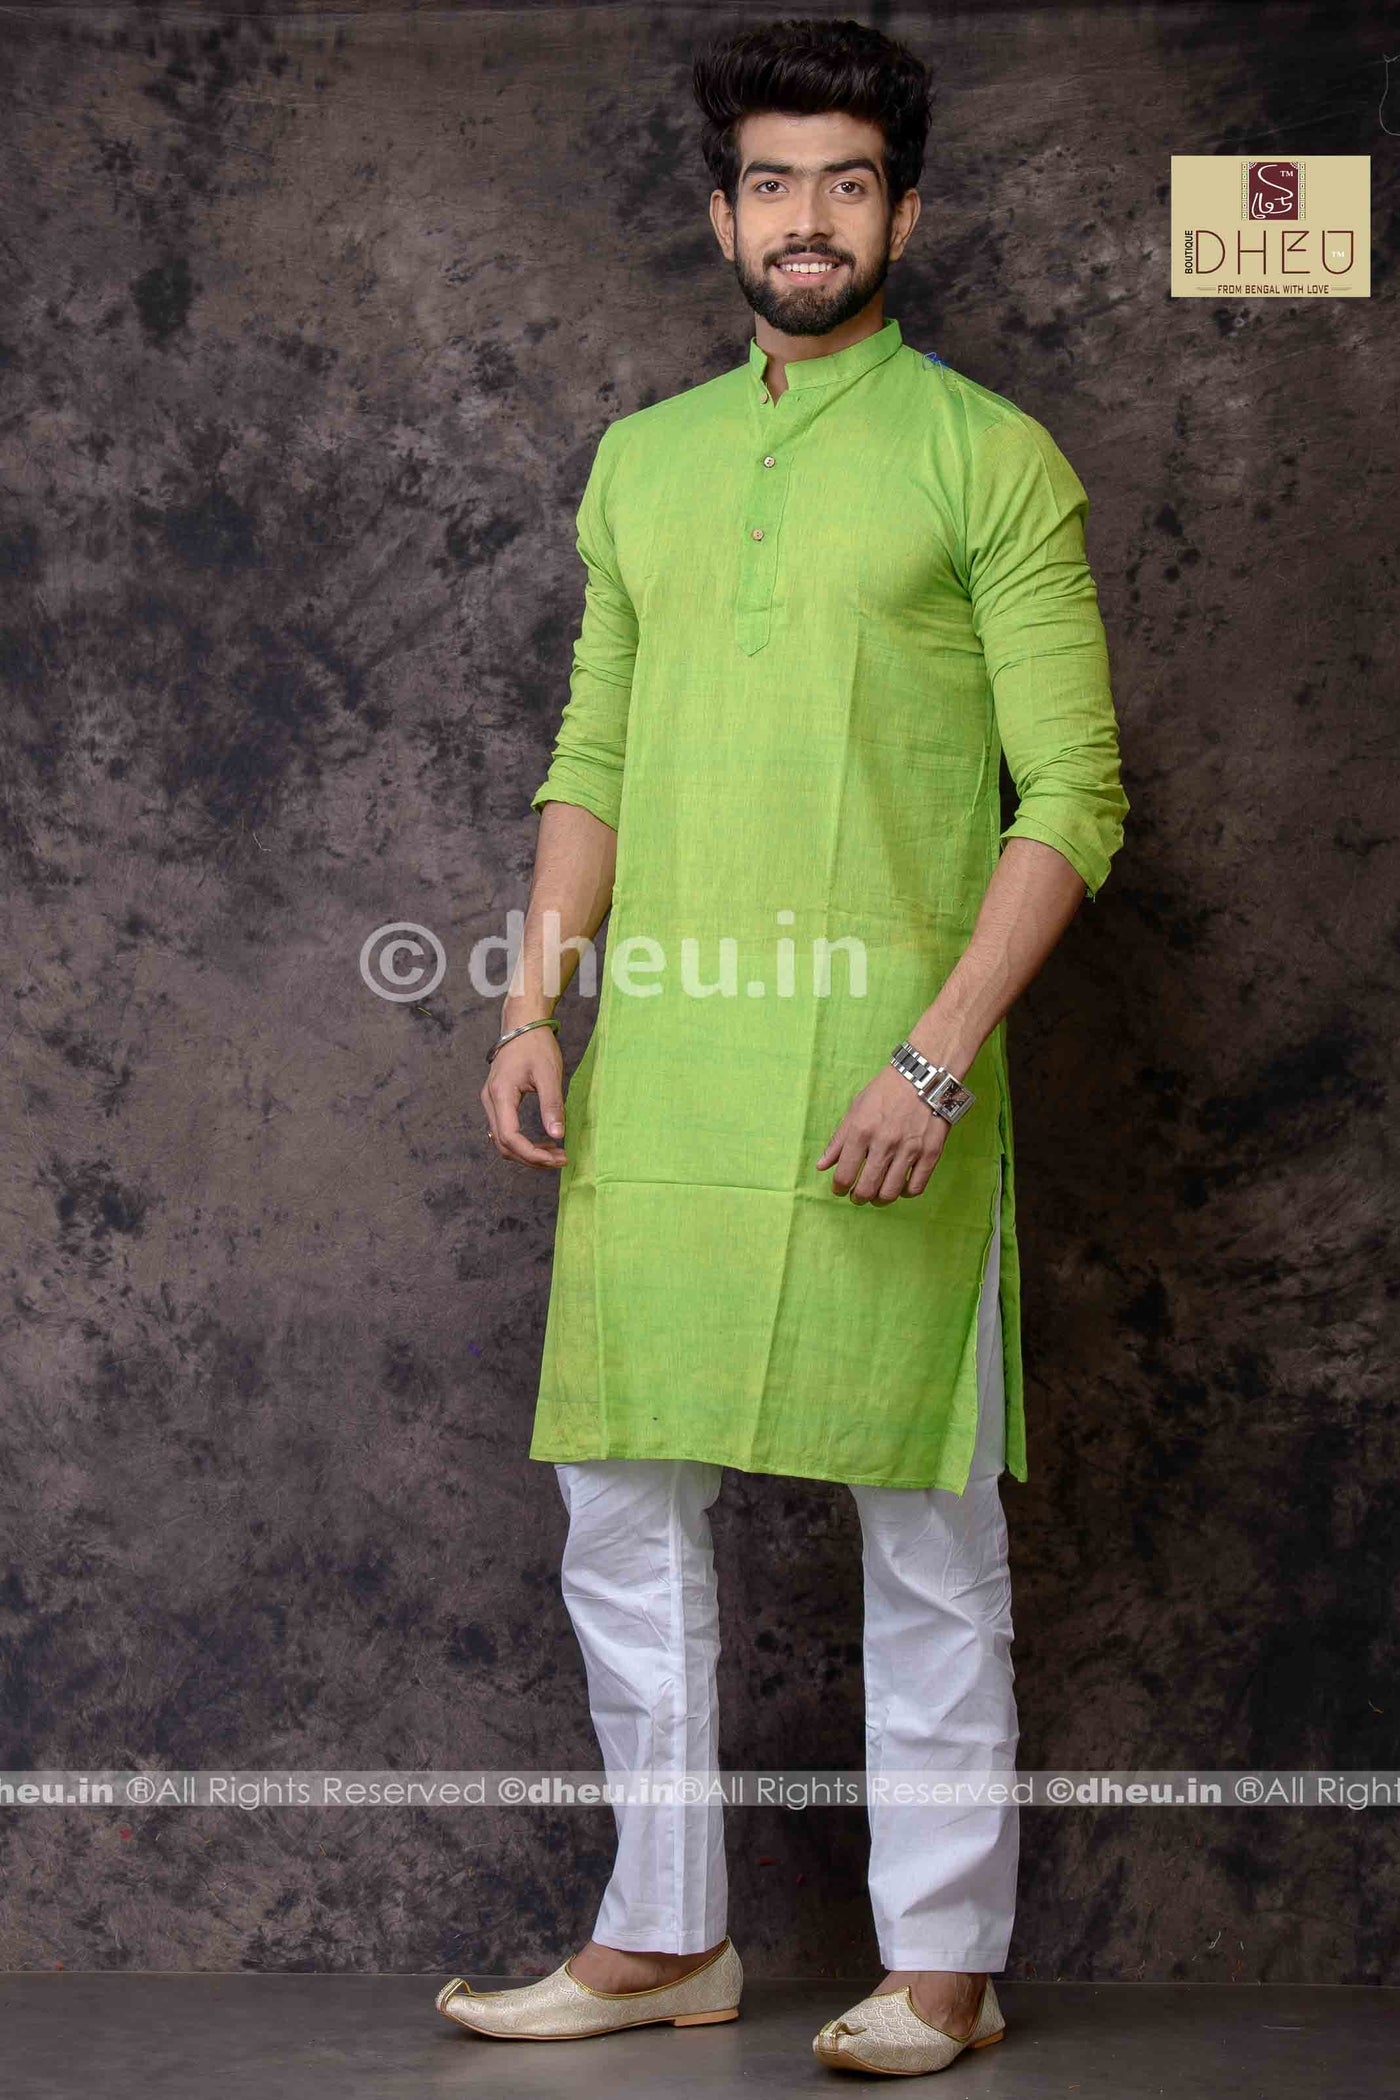 Vibrant  Fluro cent green designer kurta at low cost in dheu.in